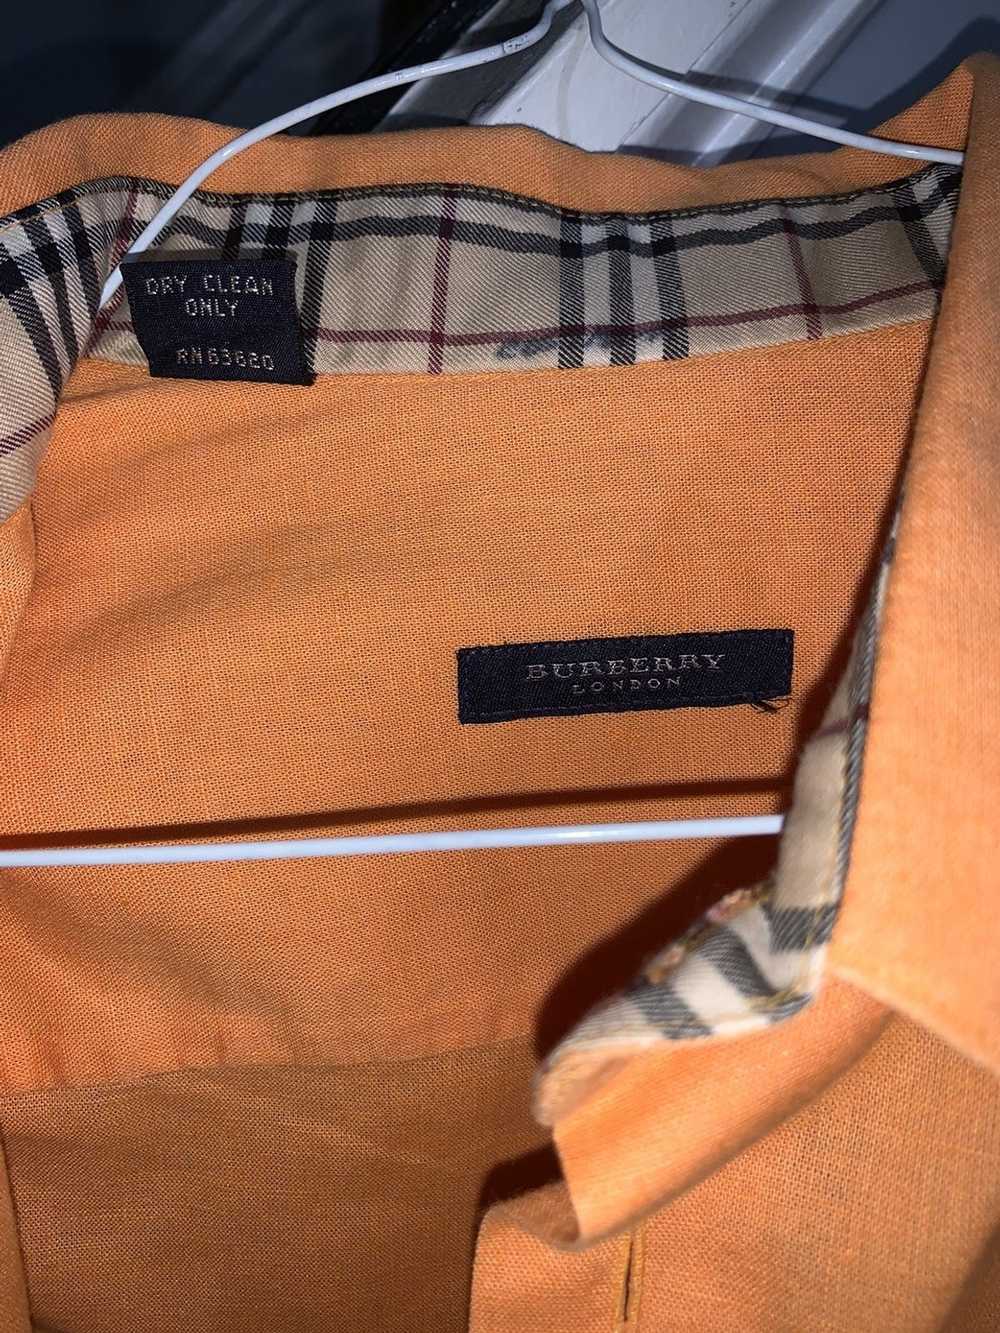 Burberry Burberry short sleeve button up small - image 2